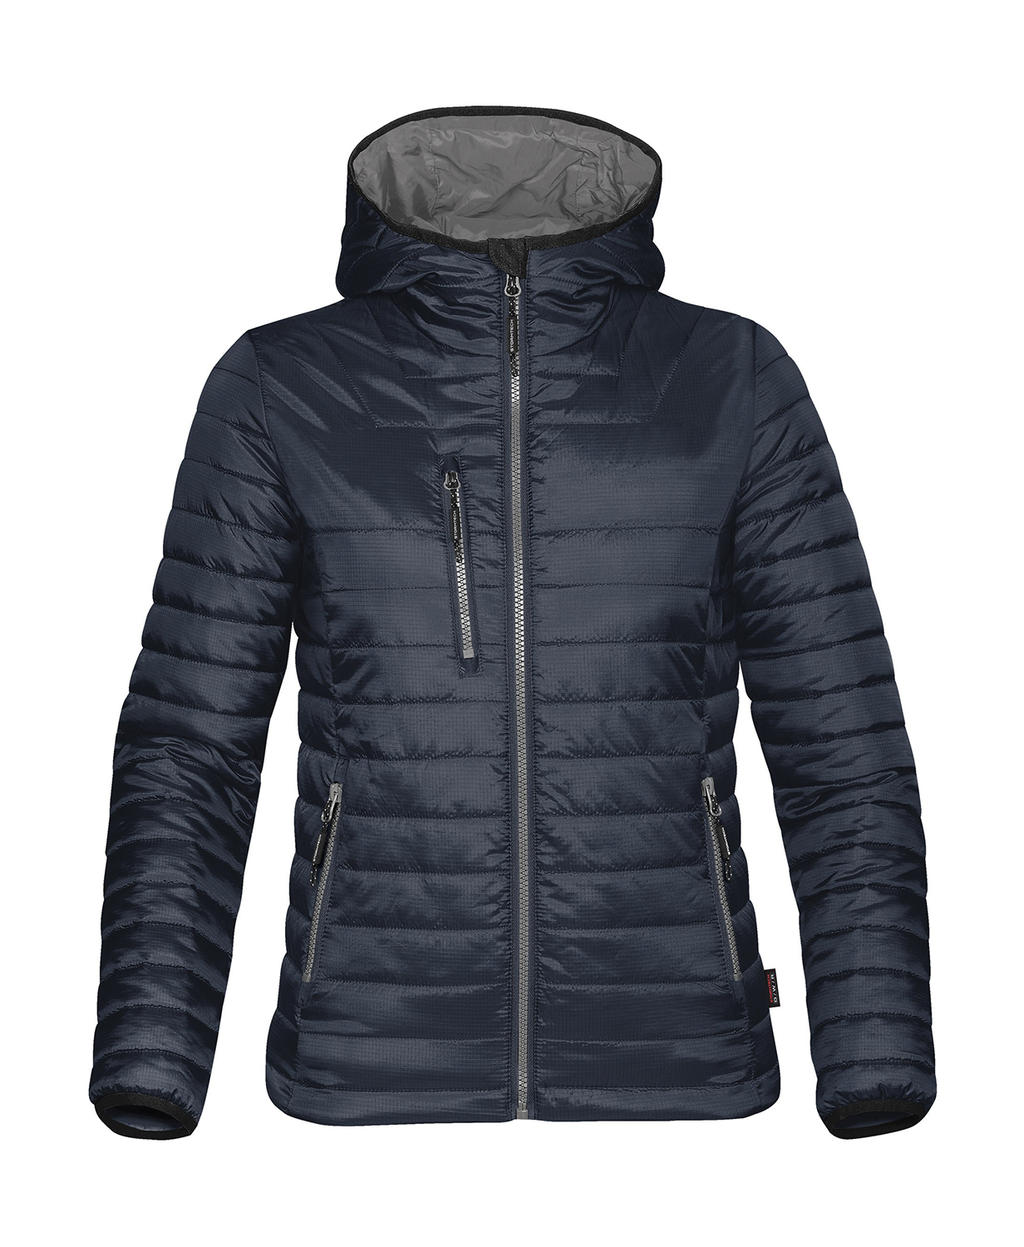  Womens Gravity Thermal Jacket in Farbe Navy/Charcoal